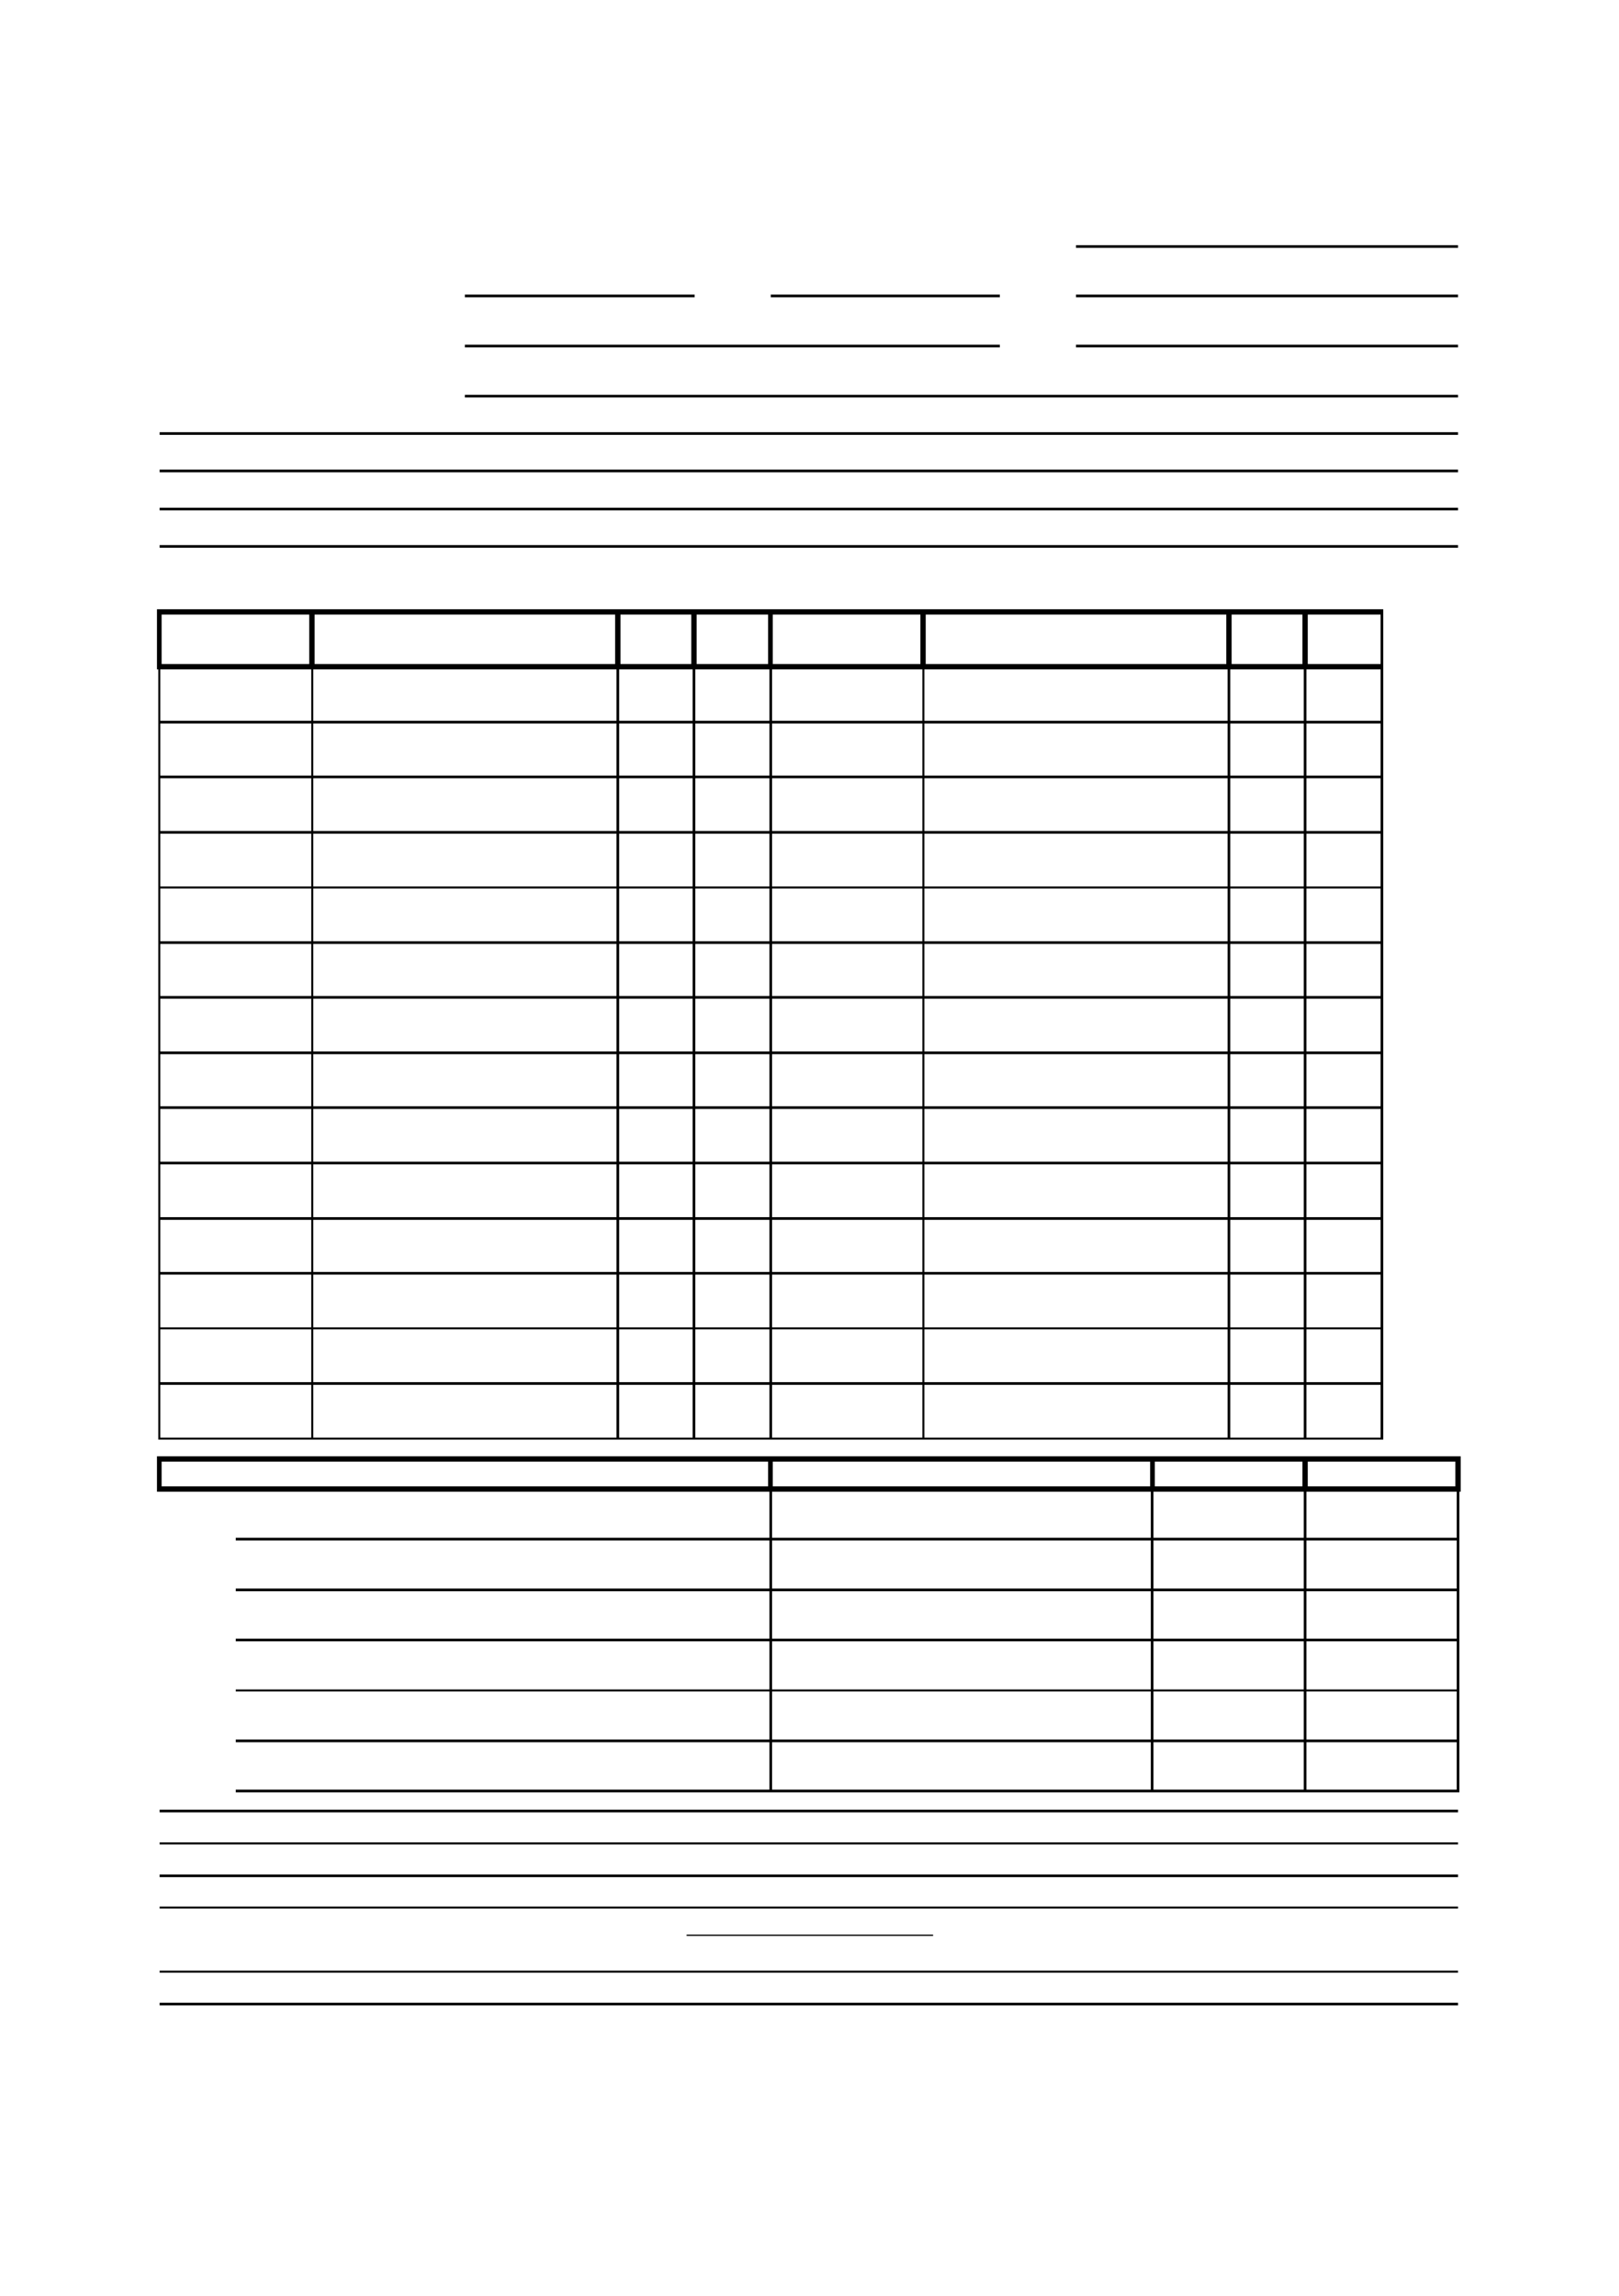 Film Call Sheet Template Free Download With Regard To Film Call Sheet Template Word